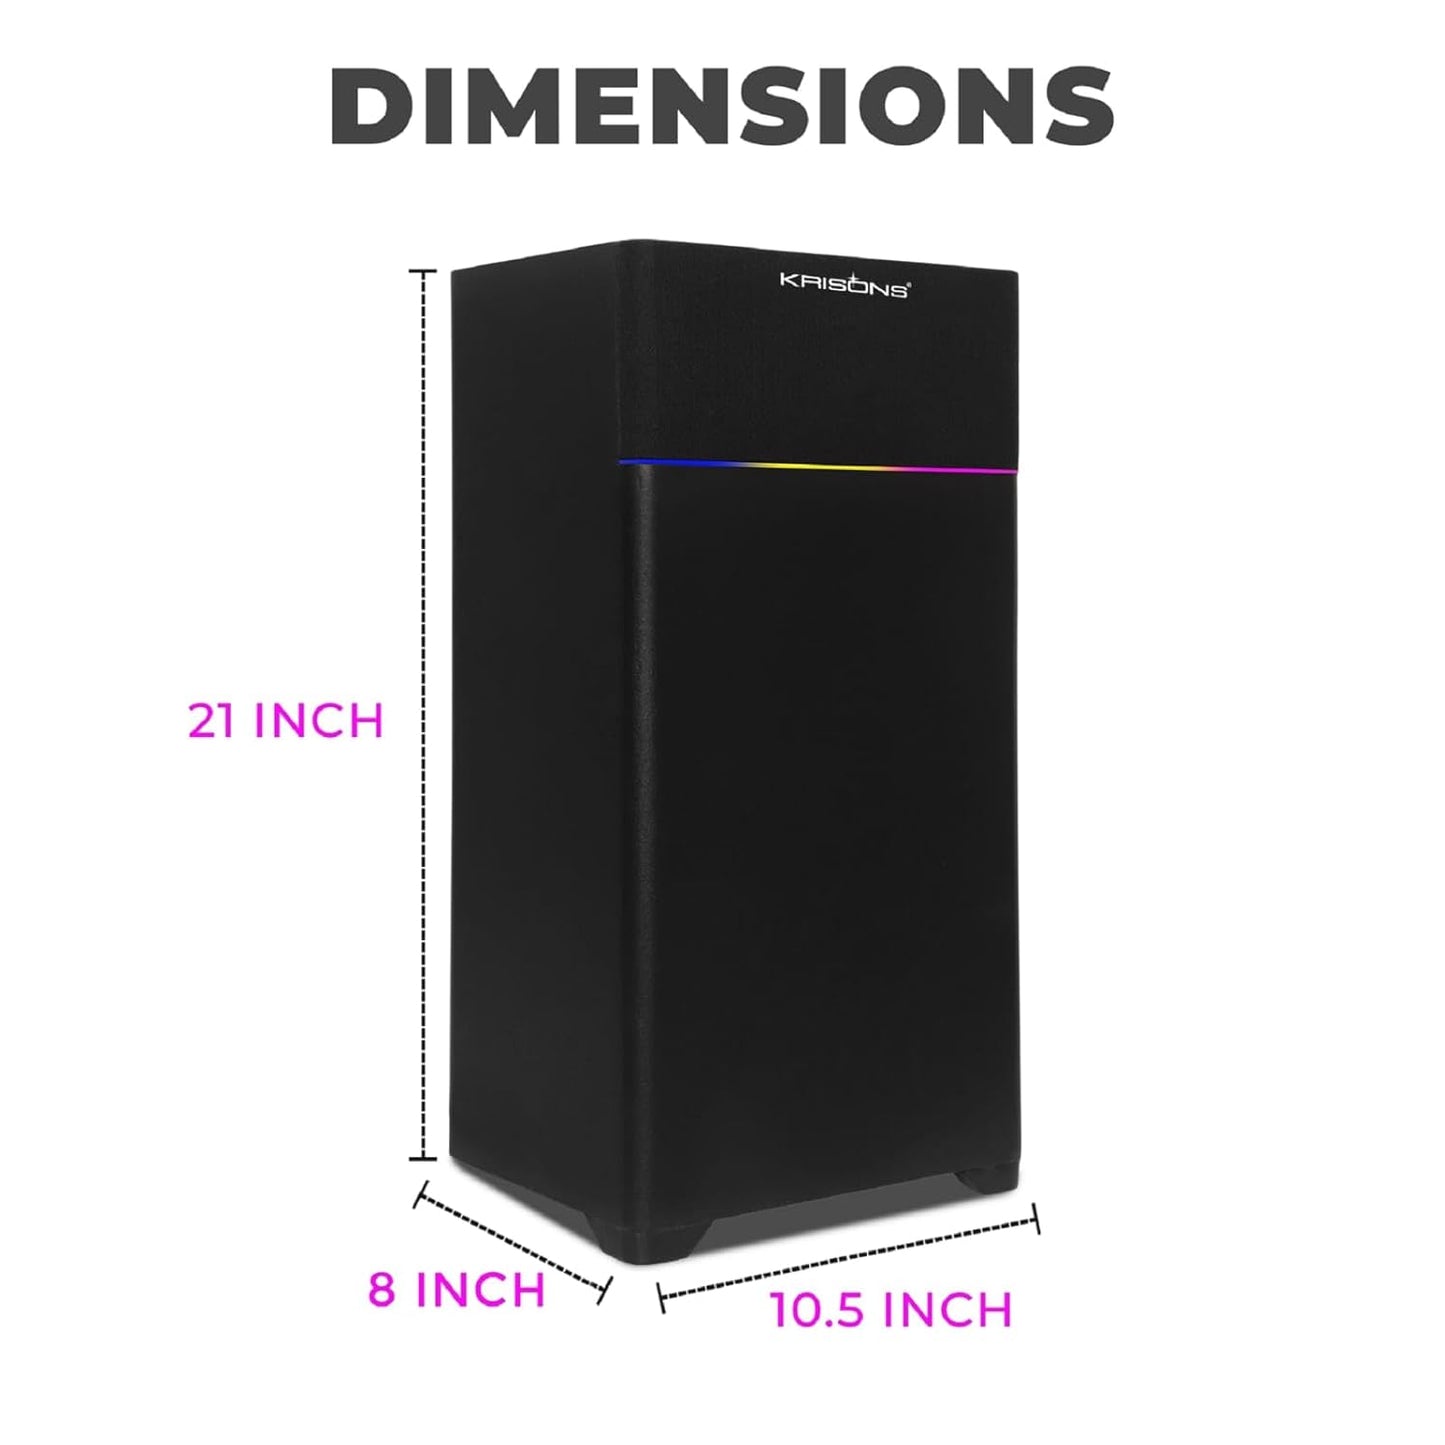 KRISONS Newly Launched Rocker Powerful 120W RMS Home Theater Bluetooth Party Box Speaker with High Power Bass, Wireless Mic with Karaoke & Mic Priority, HDMI (ARC), AUX, USB and Dynamic LED Lights